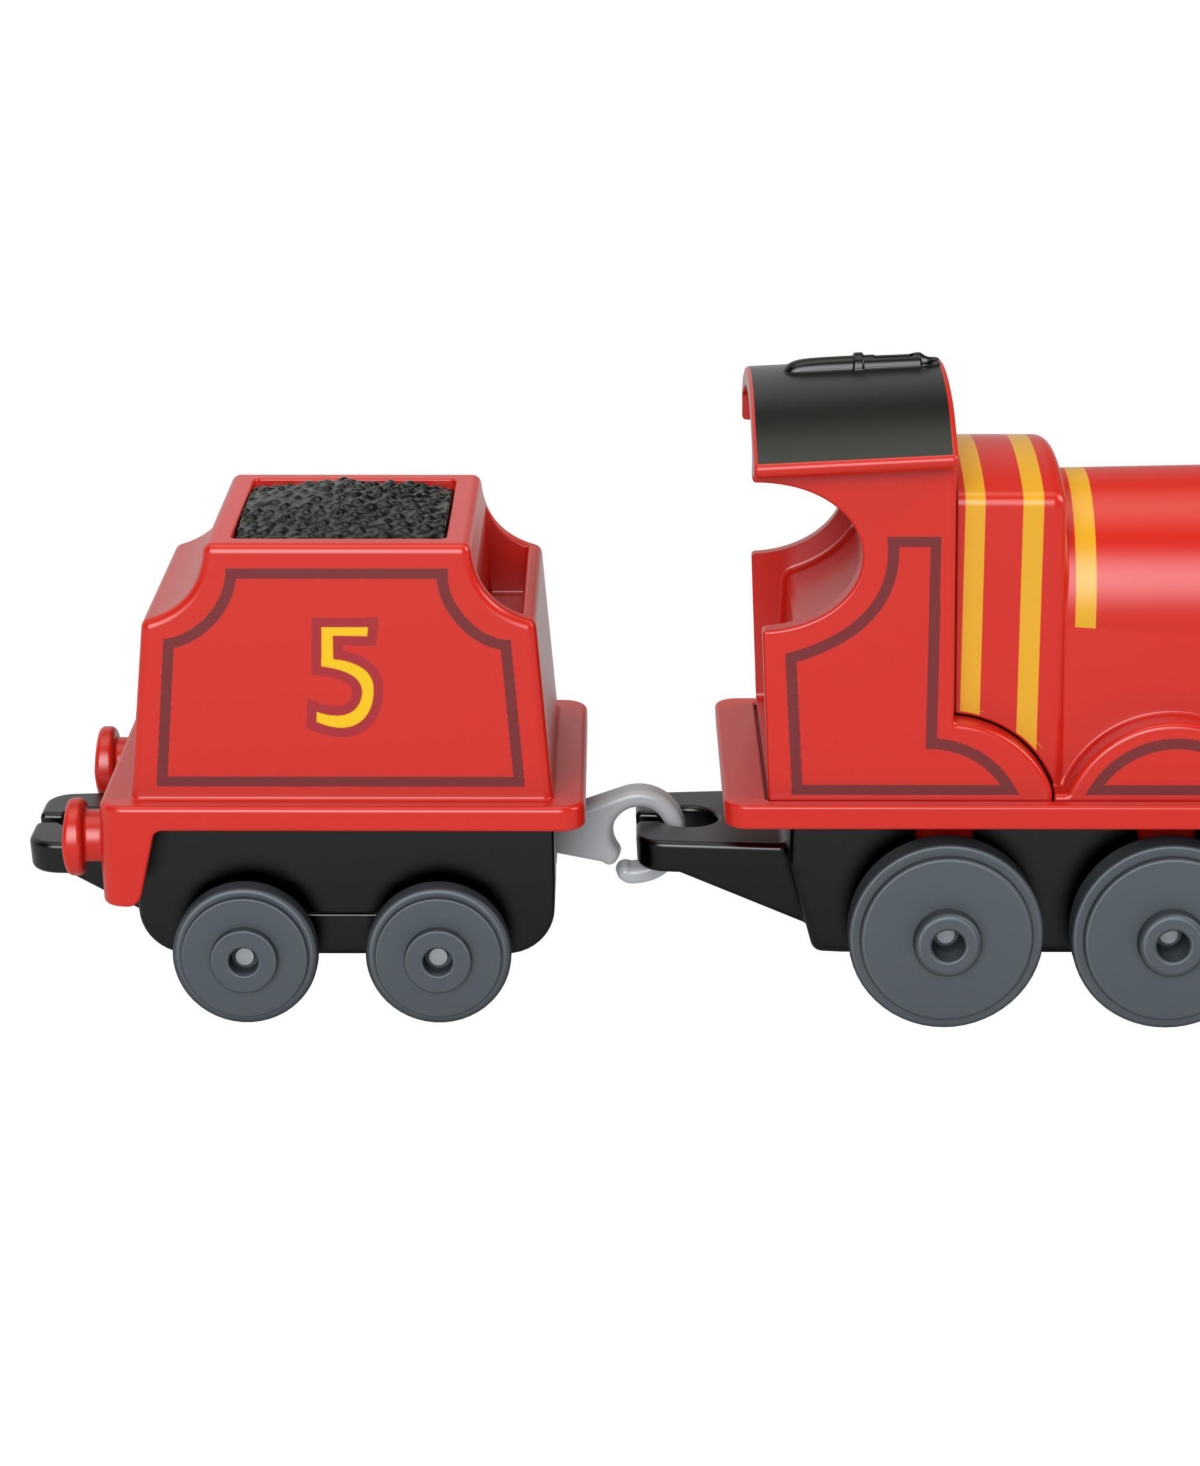 Shop Fisher Price Thomas & Friends The Track Team Engine Pack, 10 Diecast Push-along Toy Trains Vehicles In Multicolor